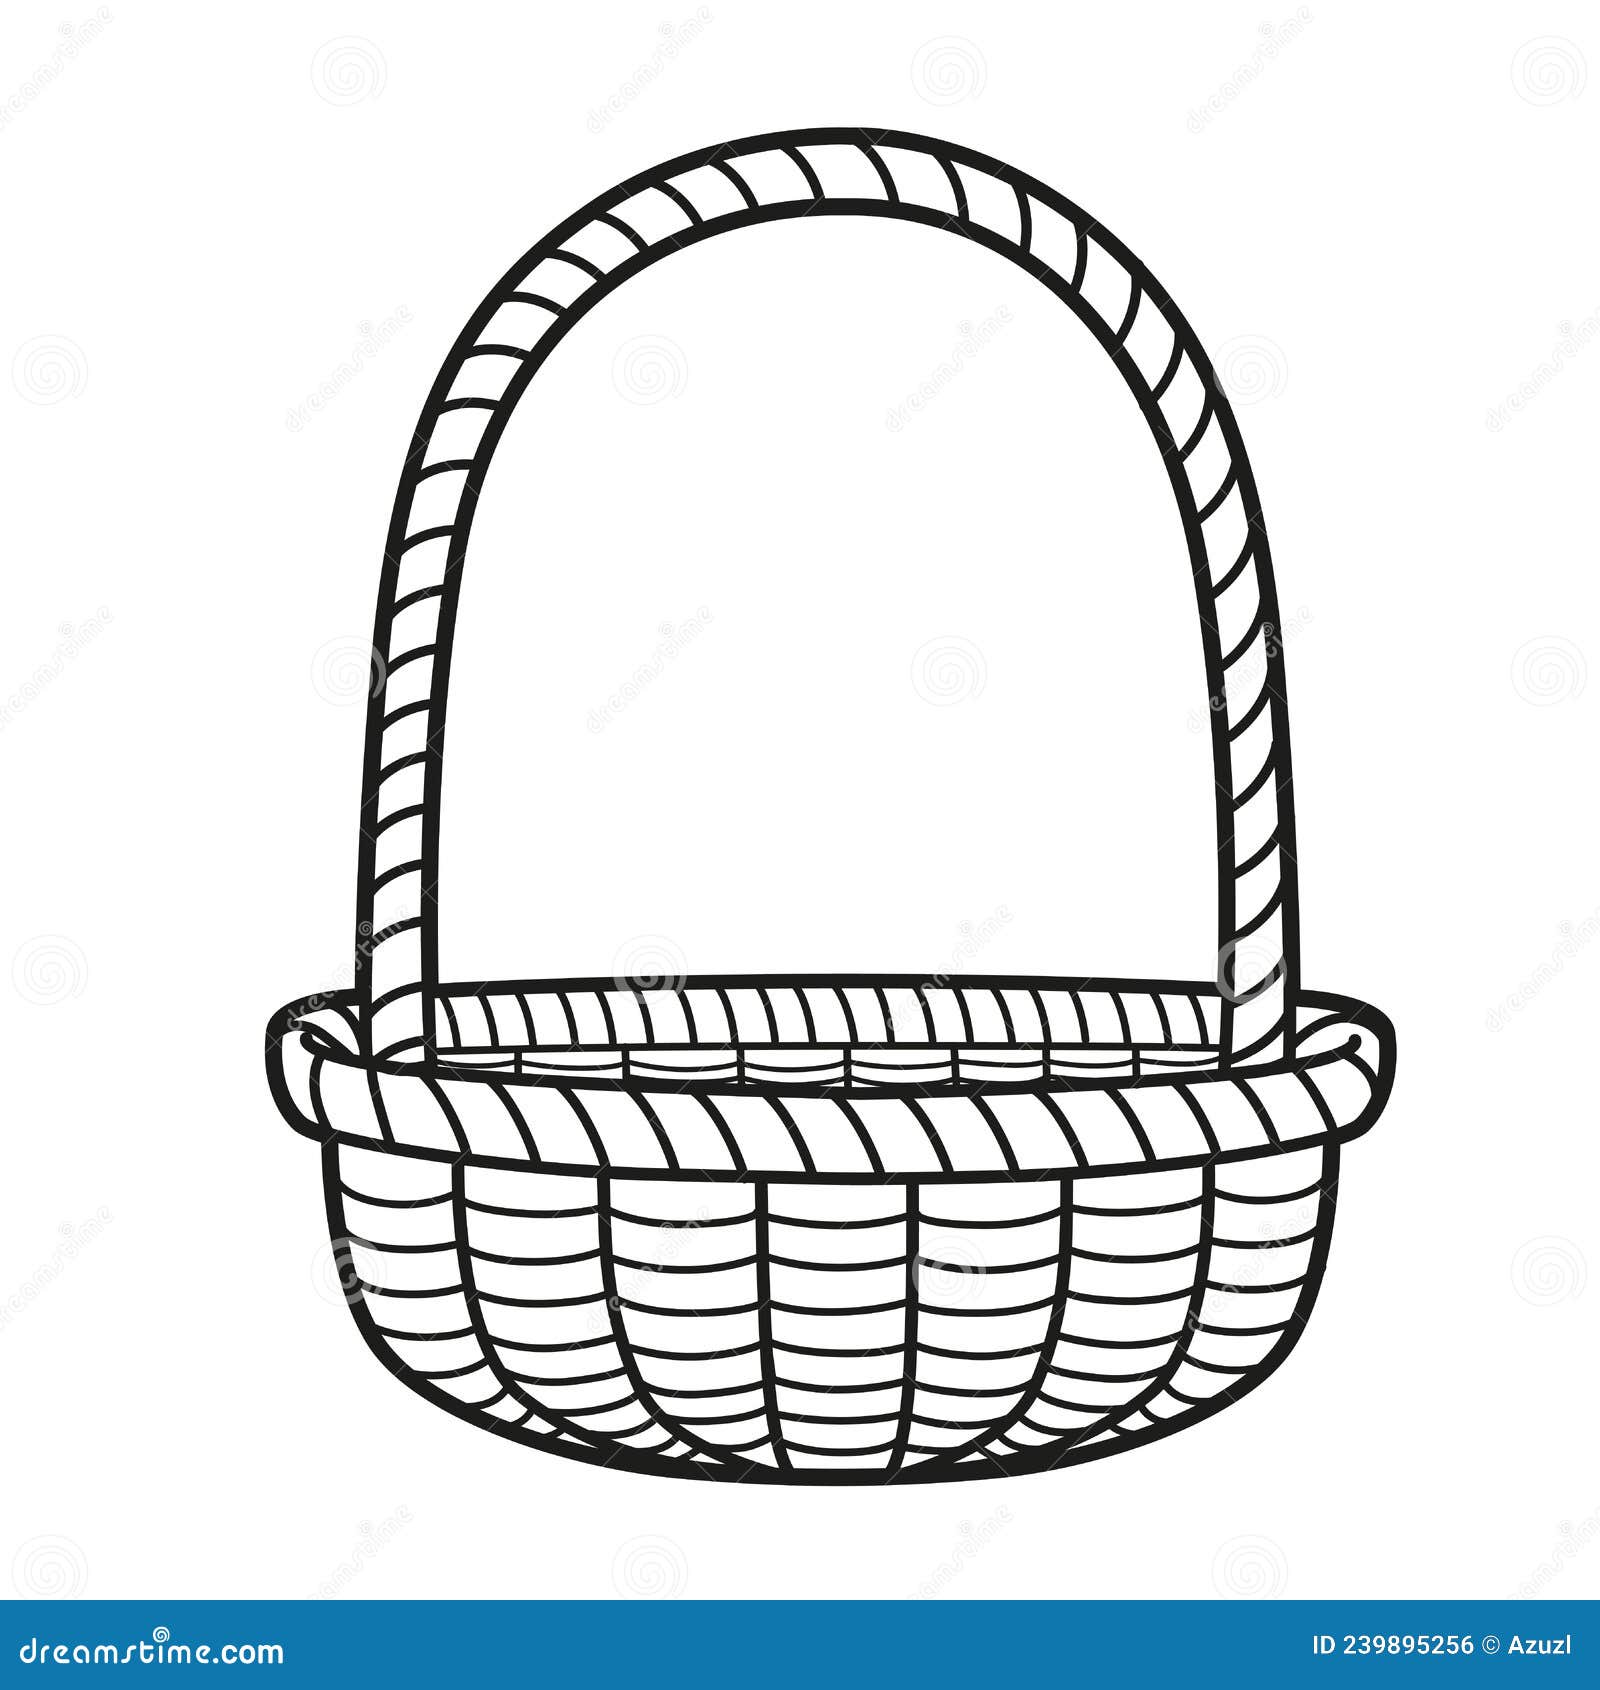 Empty wicker basket with large handle outlined for coloring book on white stock vector